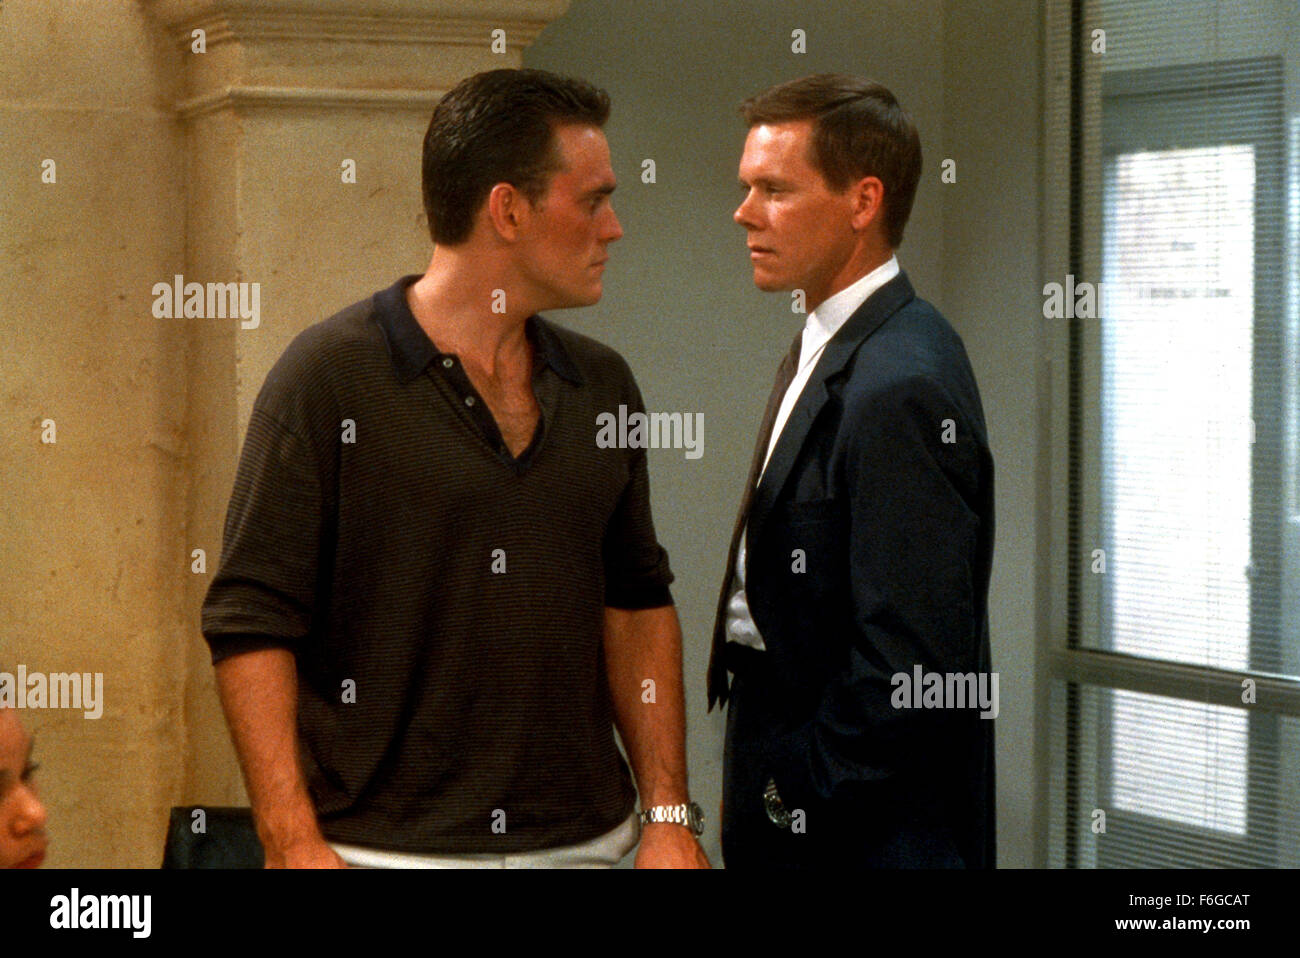 Sep 05, 1998; Hollywood, CA, USA; KEVIN BACON and MATT DILLON star as Sgt. Ray Duquette and Sam Lombardo in the crime thriller 'Wild Things' directed by John McNaughton. Stock Photo